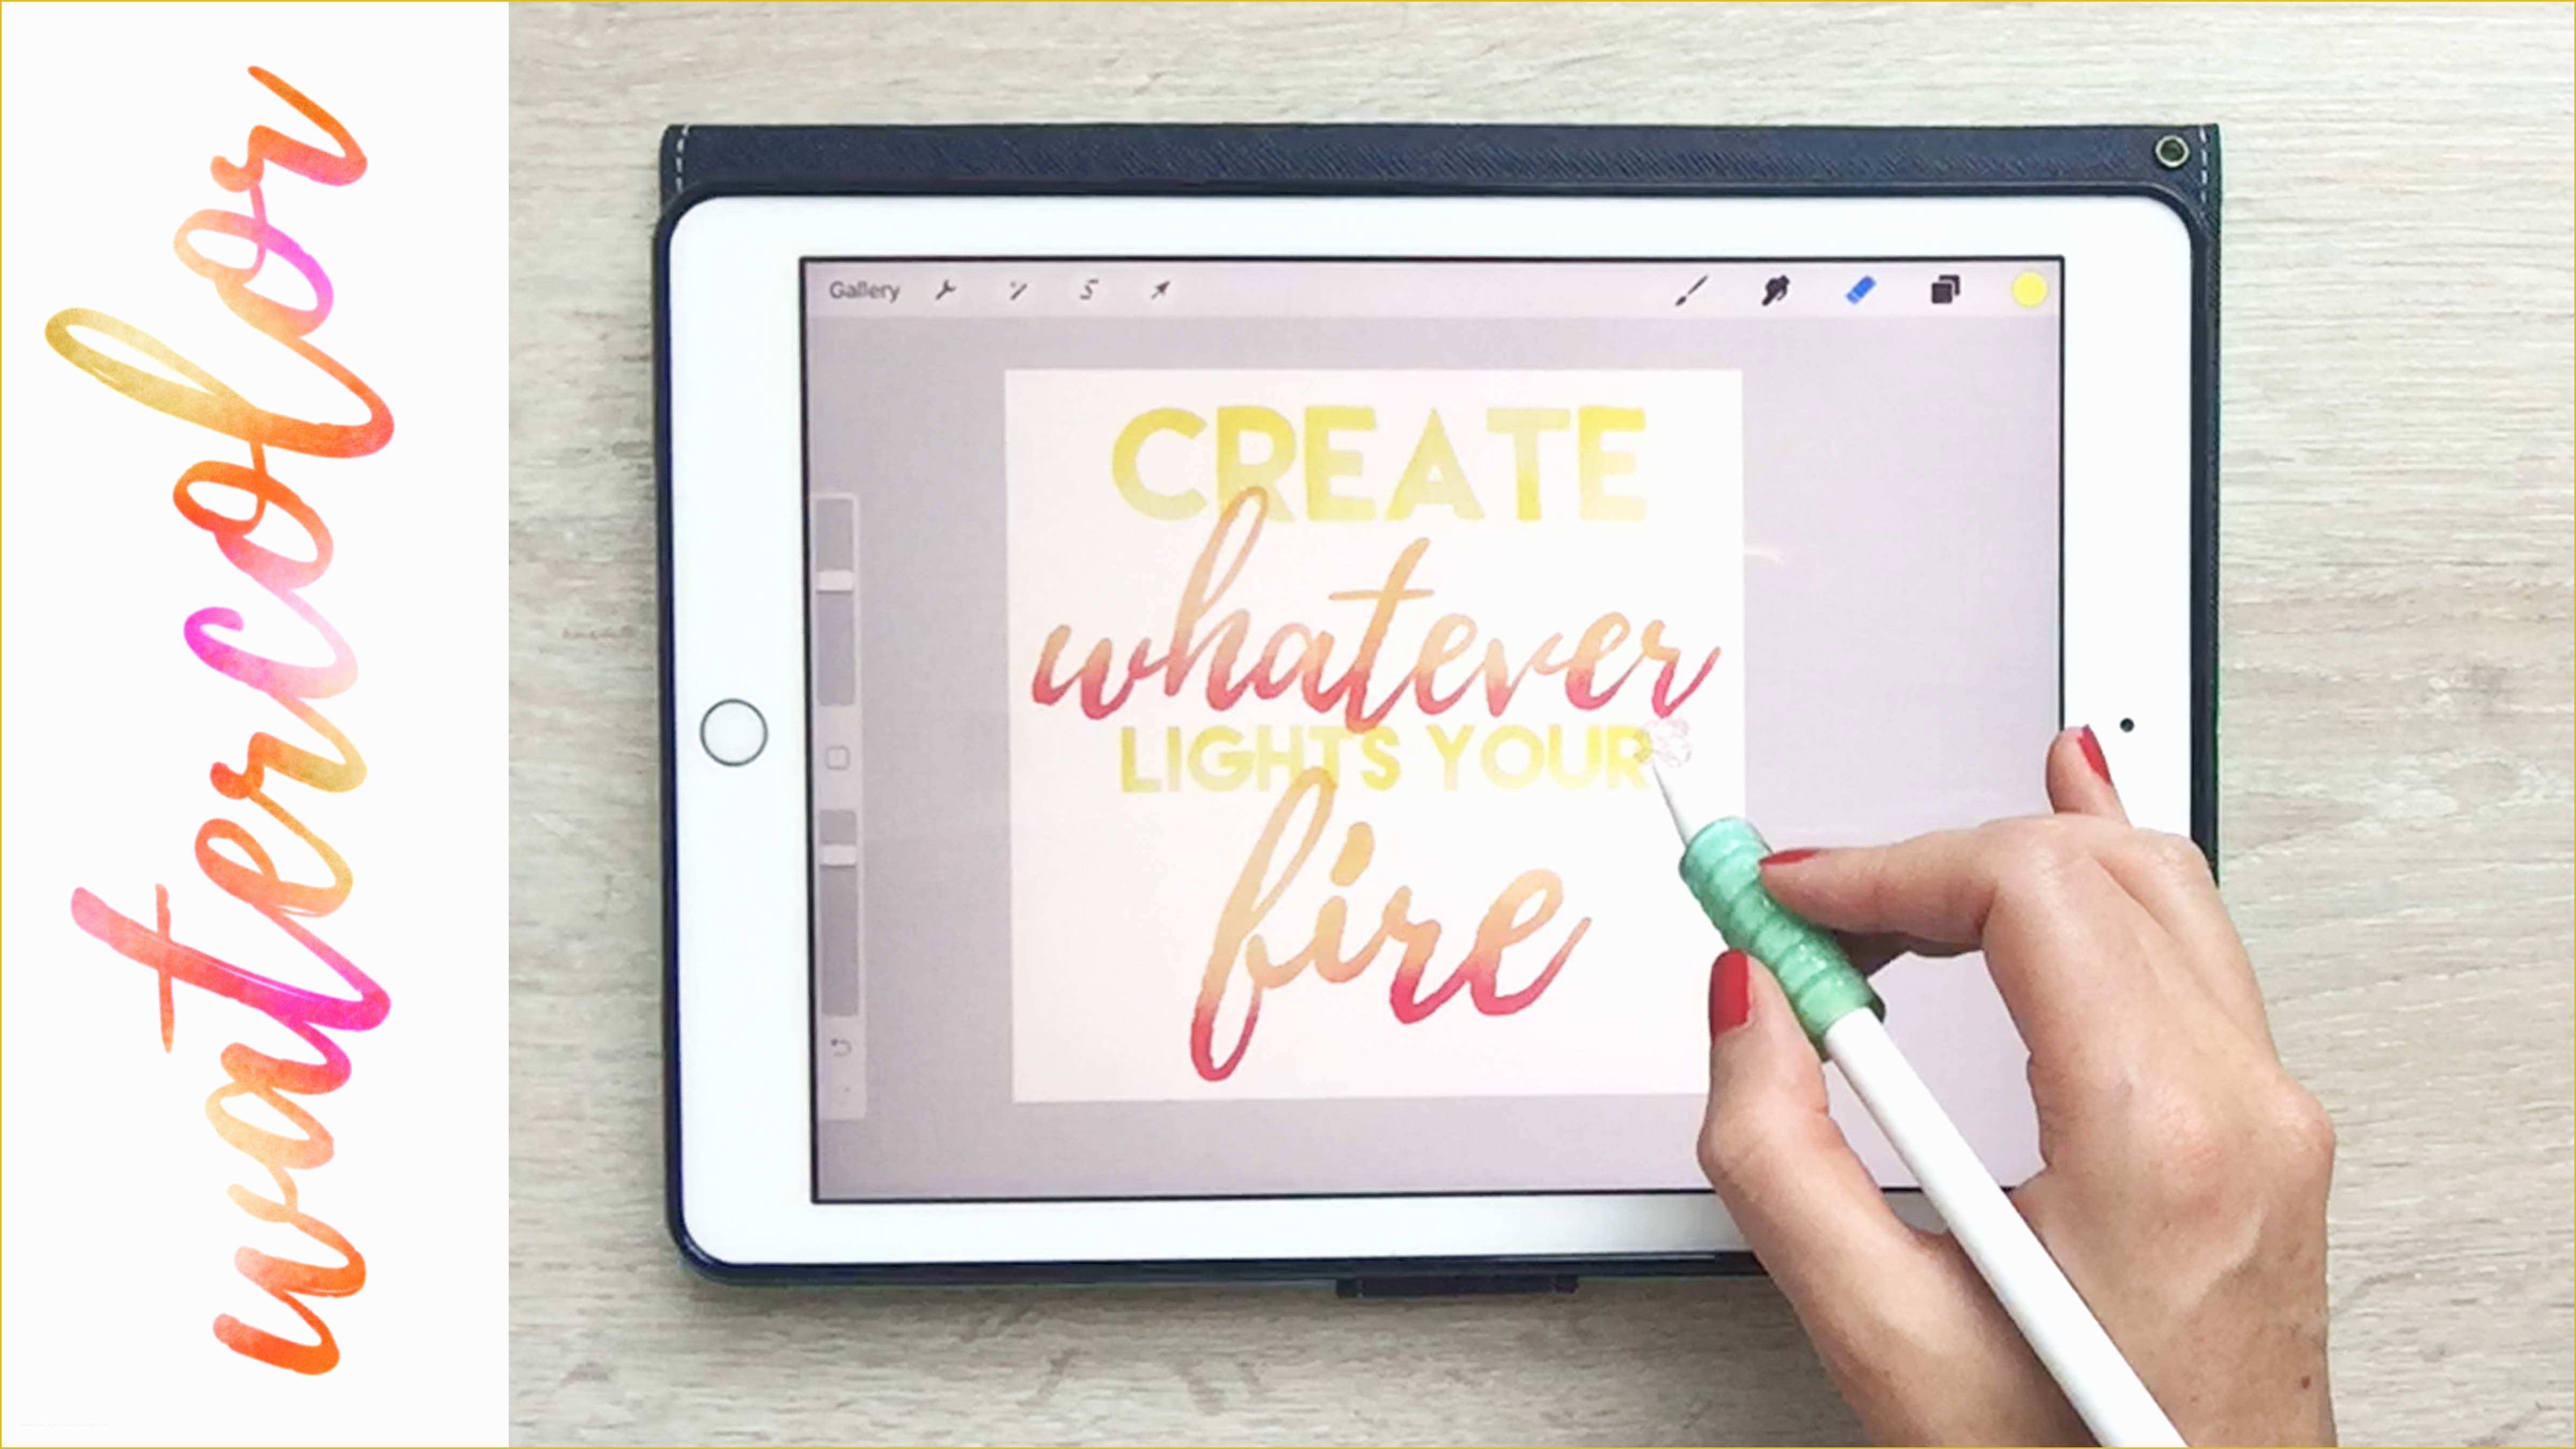 Free Procreate Templates Of Watercolor Hand Lettering On Your Ipad In Procreate Free